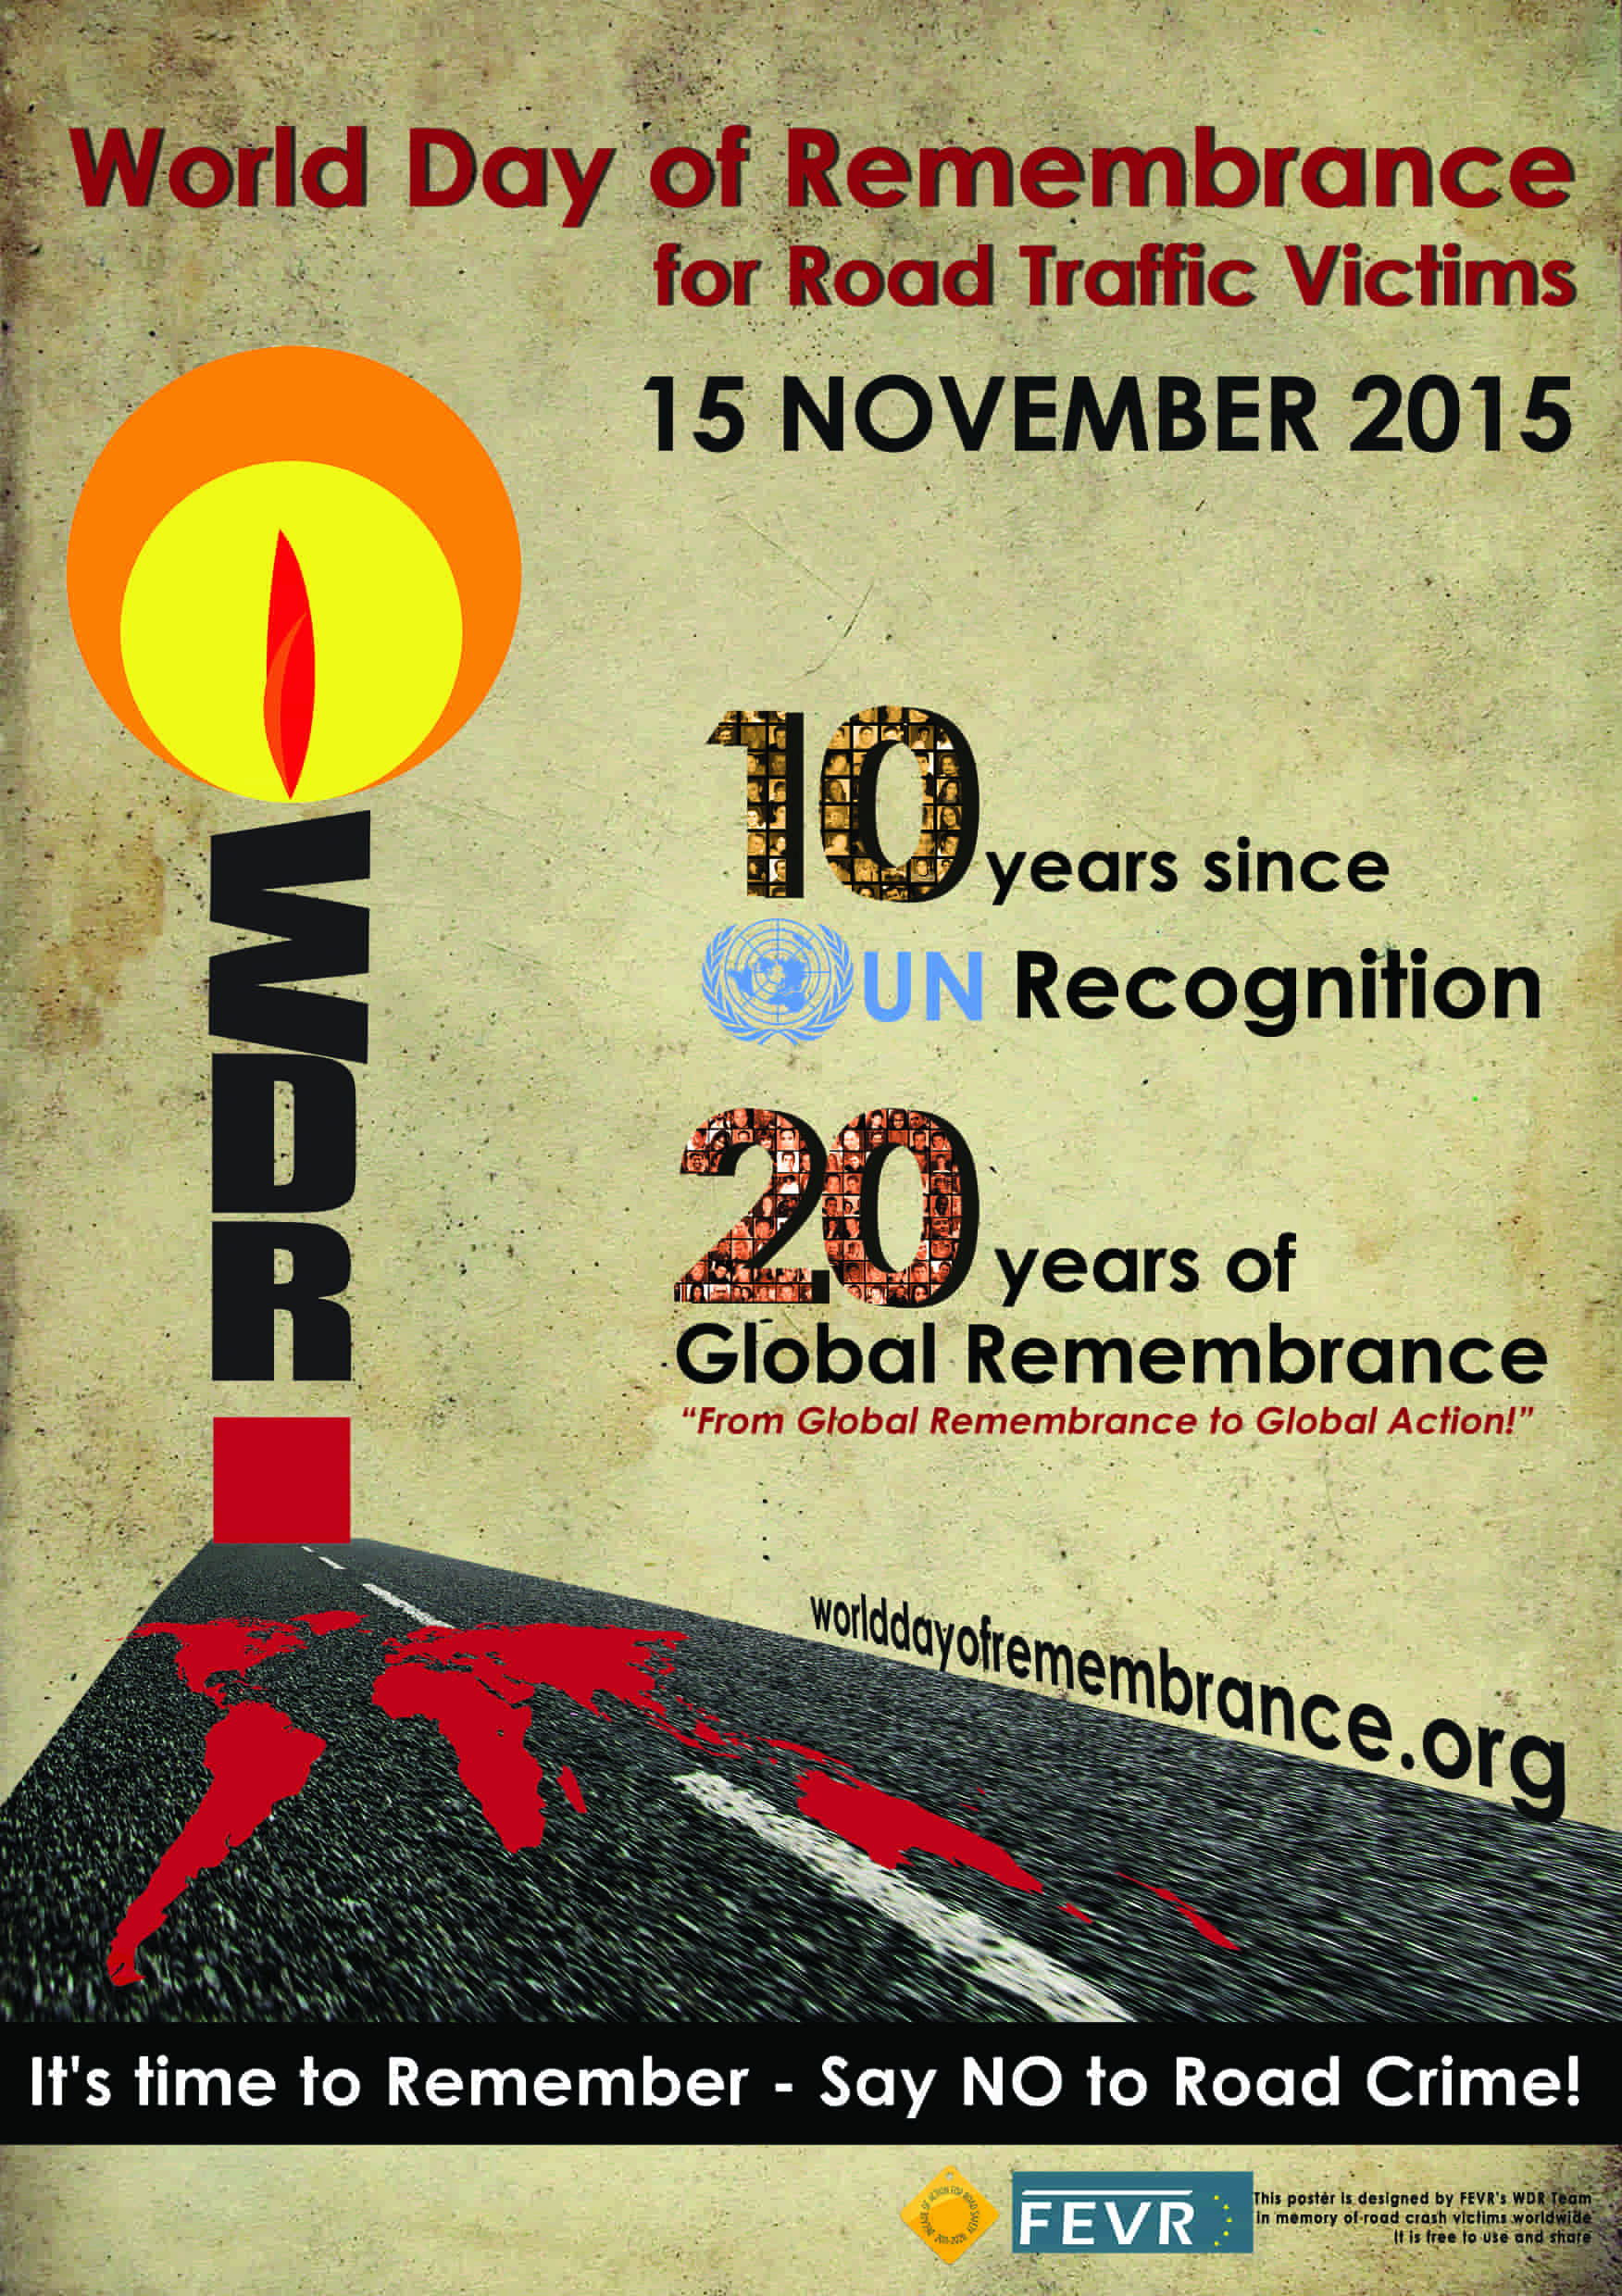 November 15th was World Day of Remembrance For Road Traffic Victims